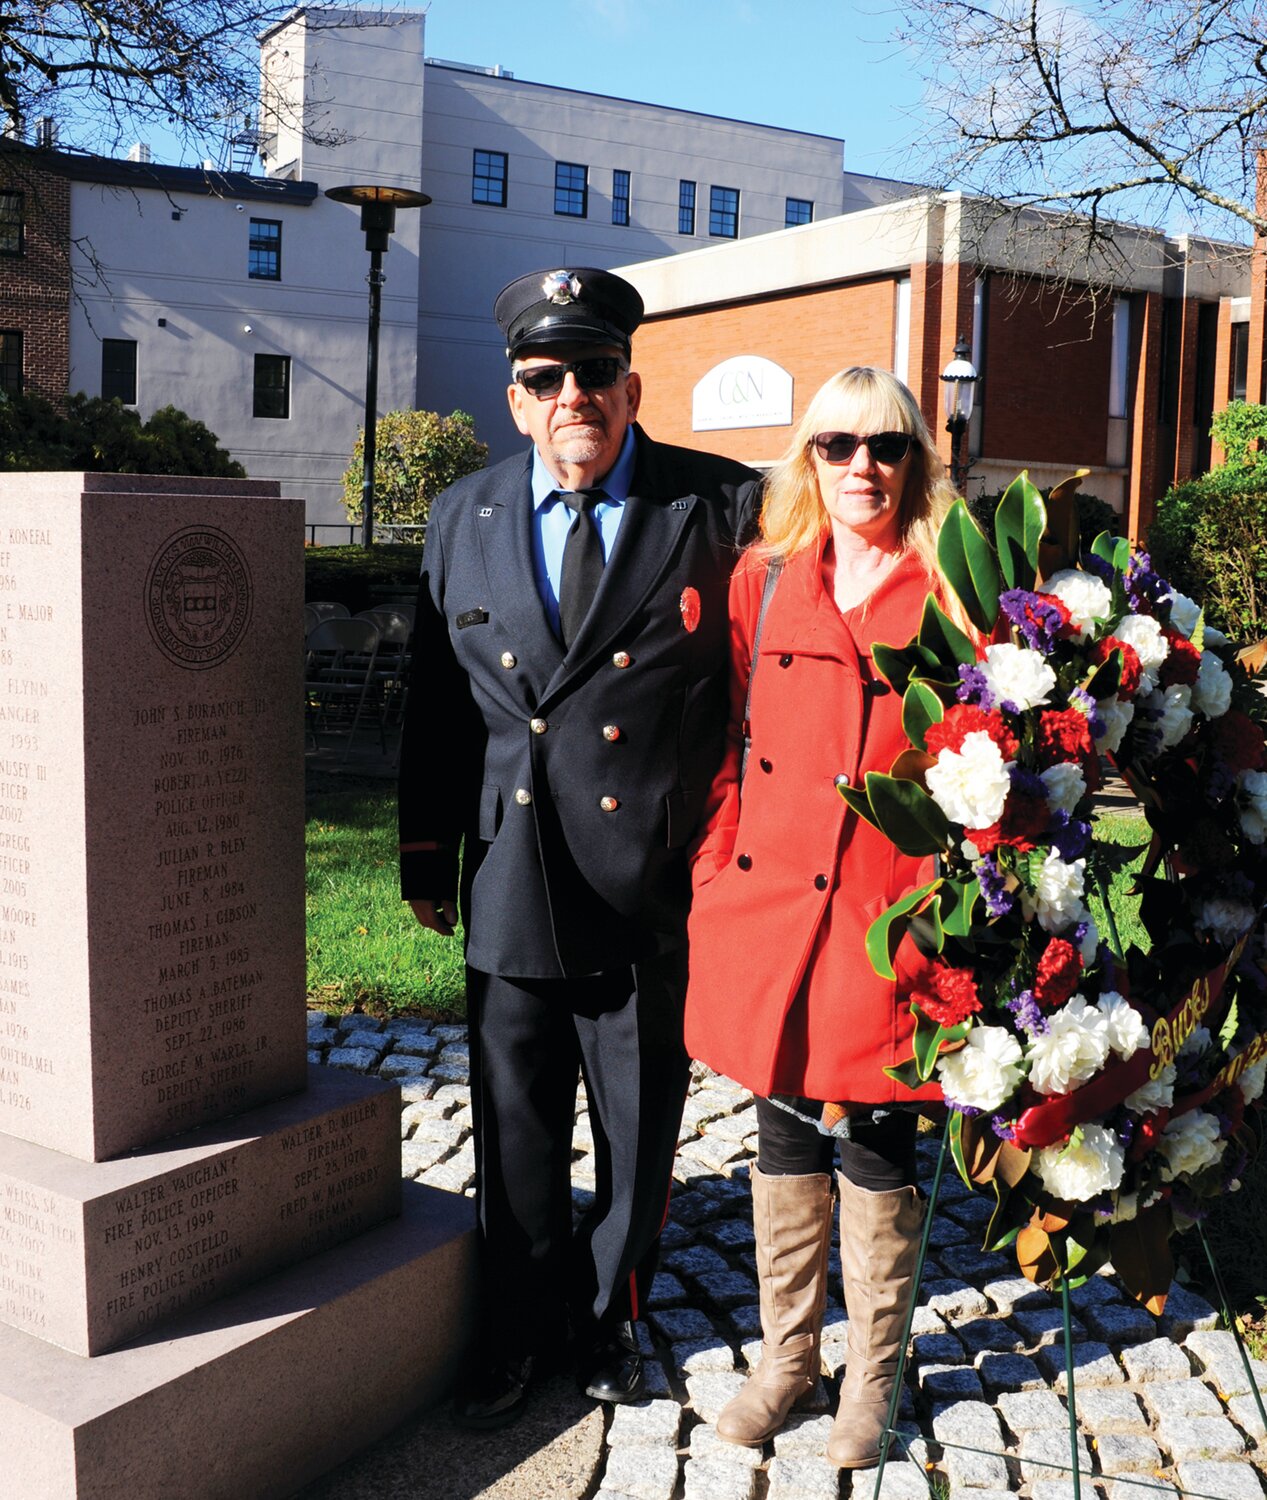 Jeff Buranich and Susan Buranich attend the ceremony in honor of John Buranich III. Buranich was a student of Bishop Egan High School, Class of 1977, and also a volunteer firefighter with Edgely Fire Co. No. 1 when he died in November 1976 from injuries sustained in a July accident en route to the fire station.